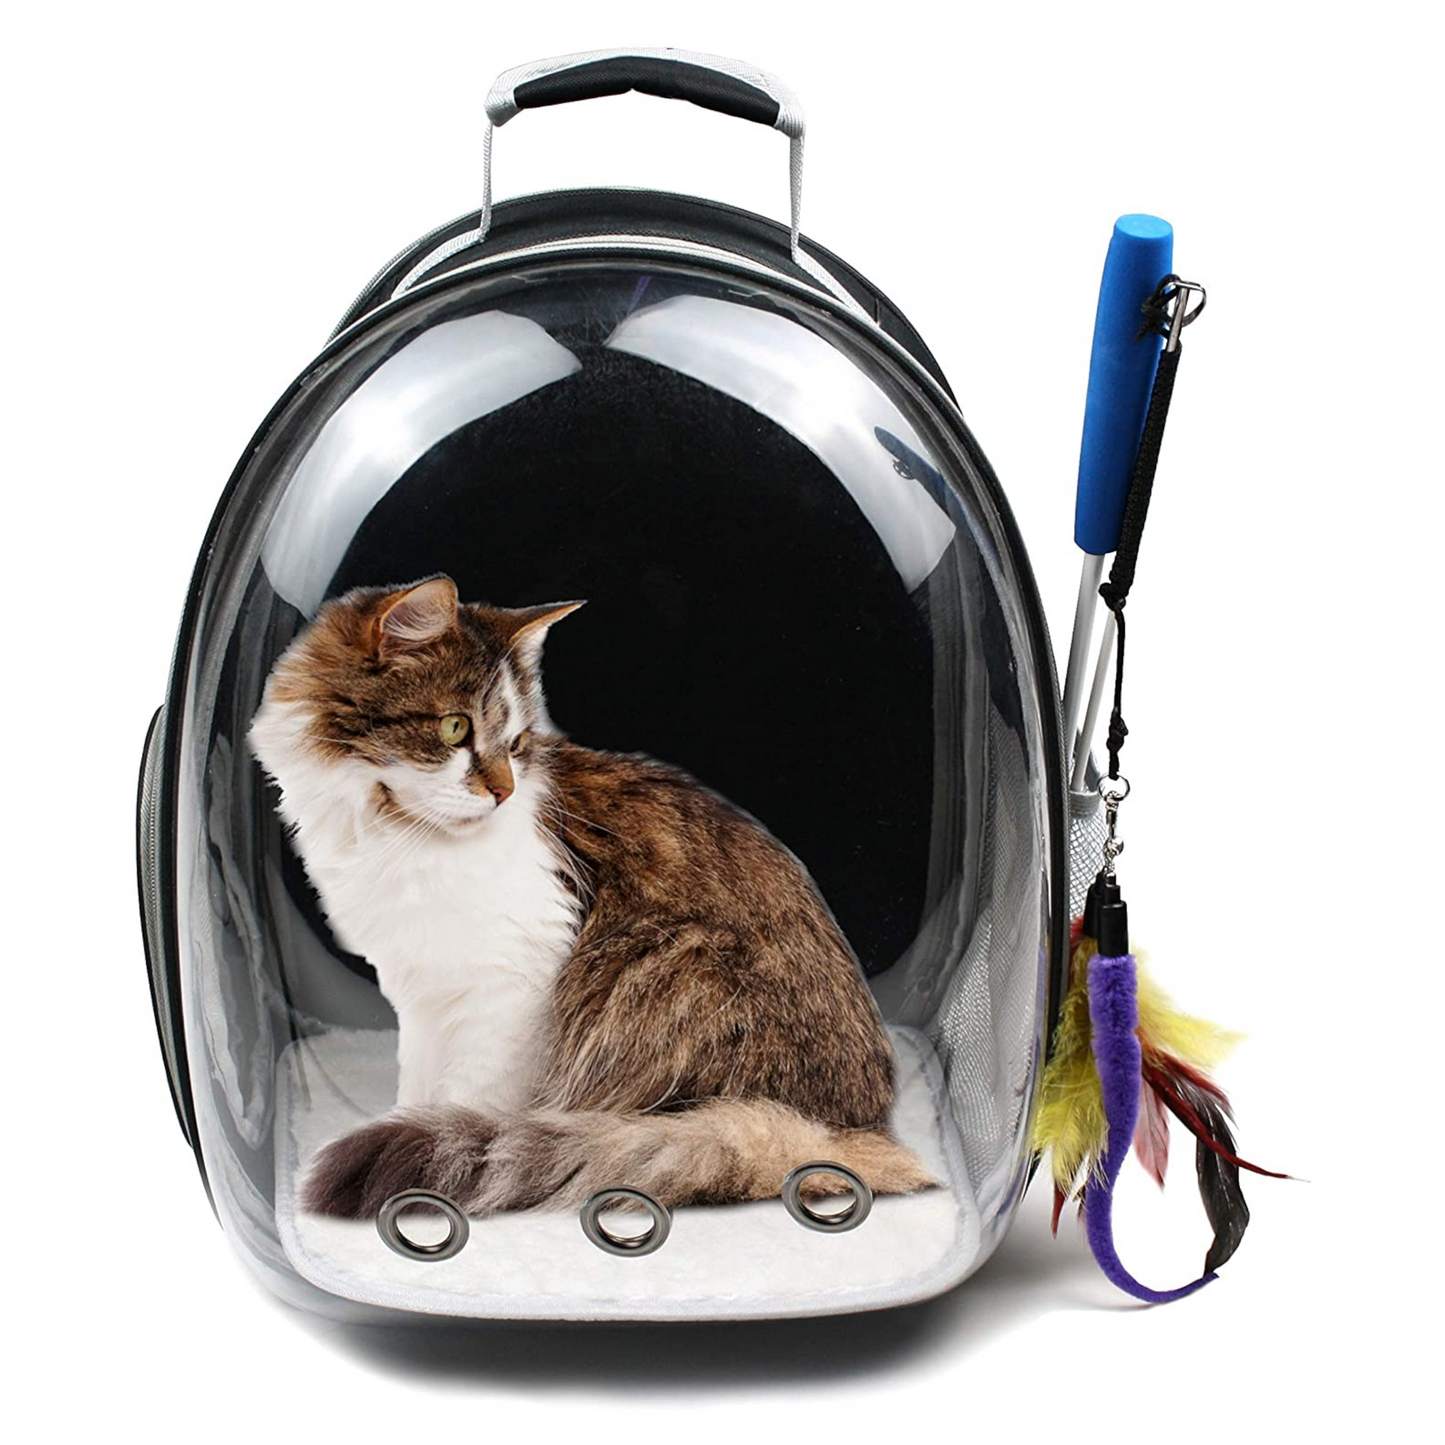 Bubble Backpack Small Dog/Cat Carrier - Bonus Wand